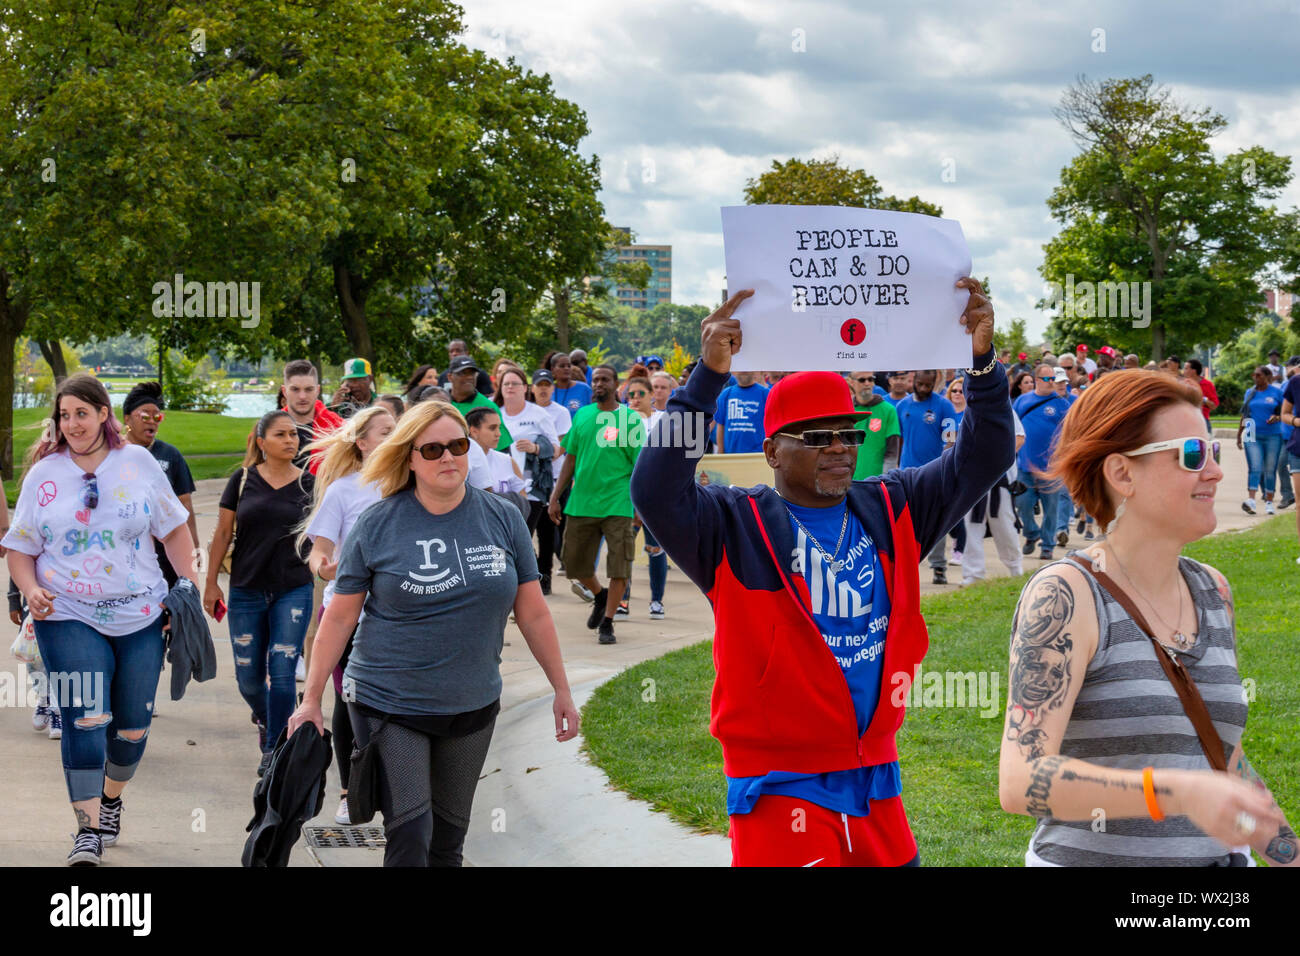 Detroit, Michigan - The Michigan Celebrate Recovery Walk and Rally, celebrating people recovering from opioid and other drug addiction. At the event, Stock Photo